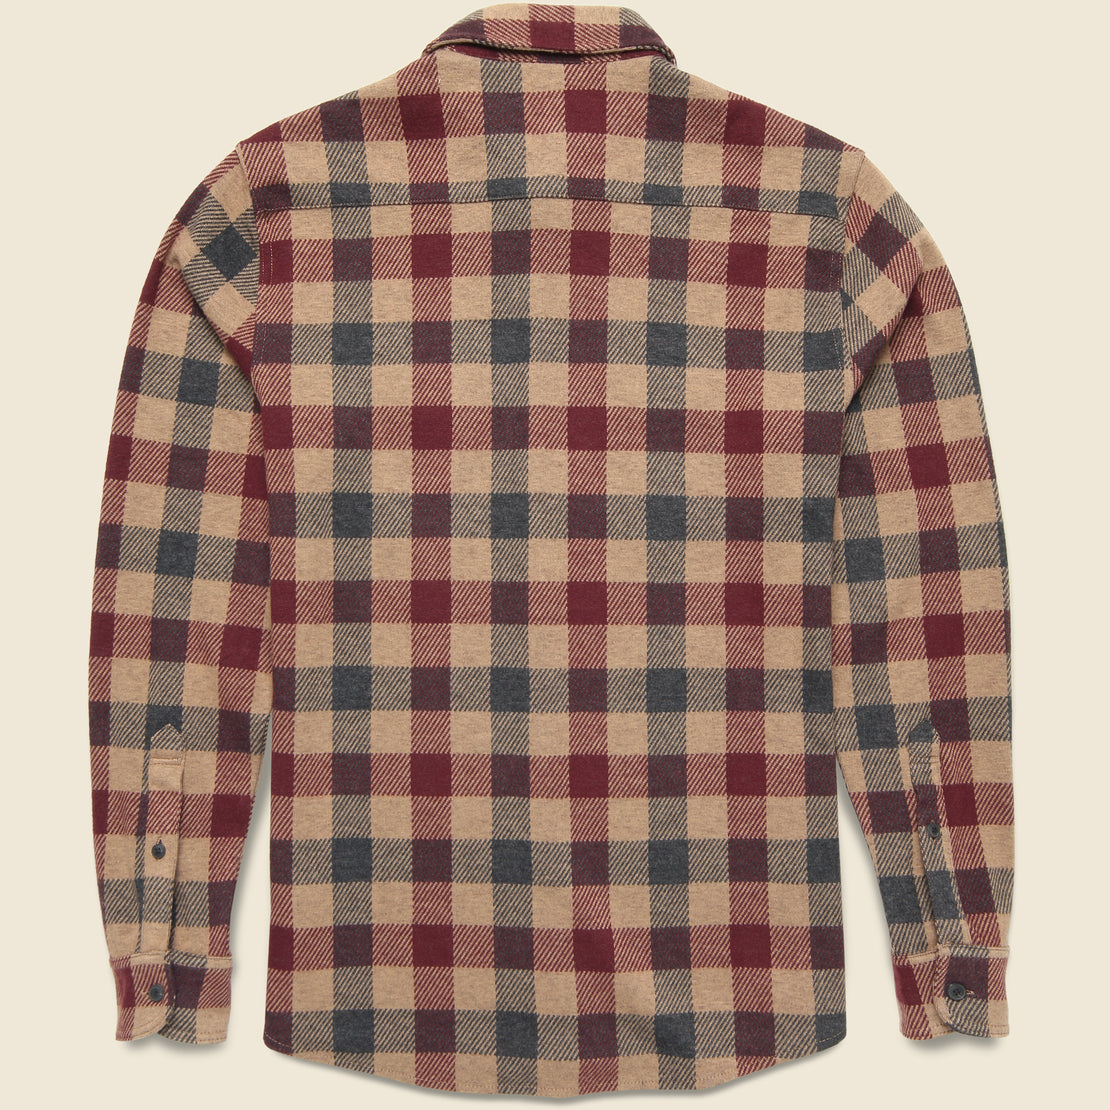 Legend Sweater Shirt - Sky Peak Buffalo - Faherty - STAG Provisions - Tops - L/S Woven - Plaid